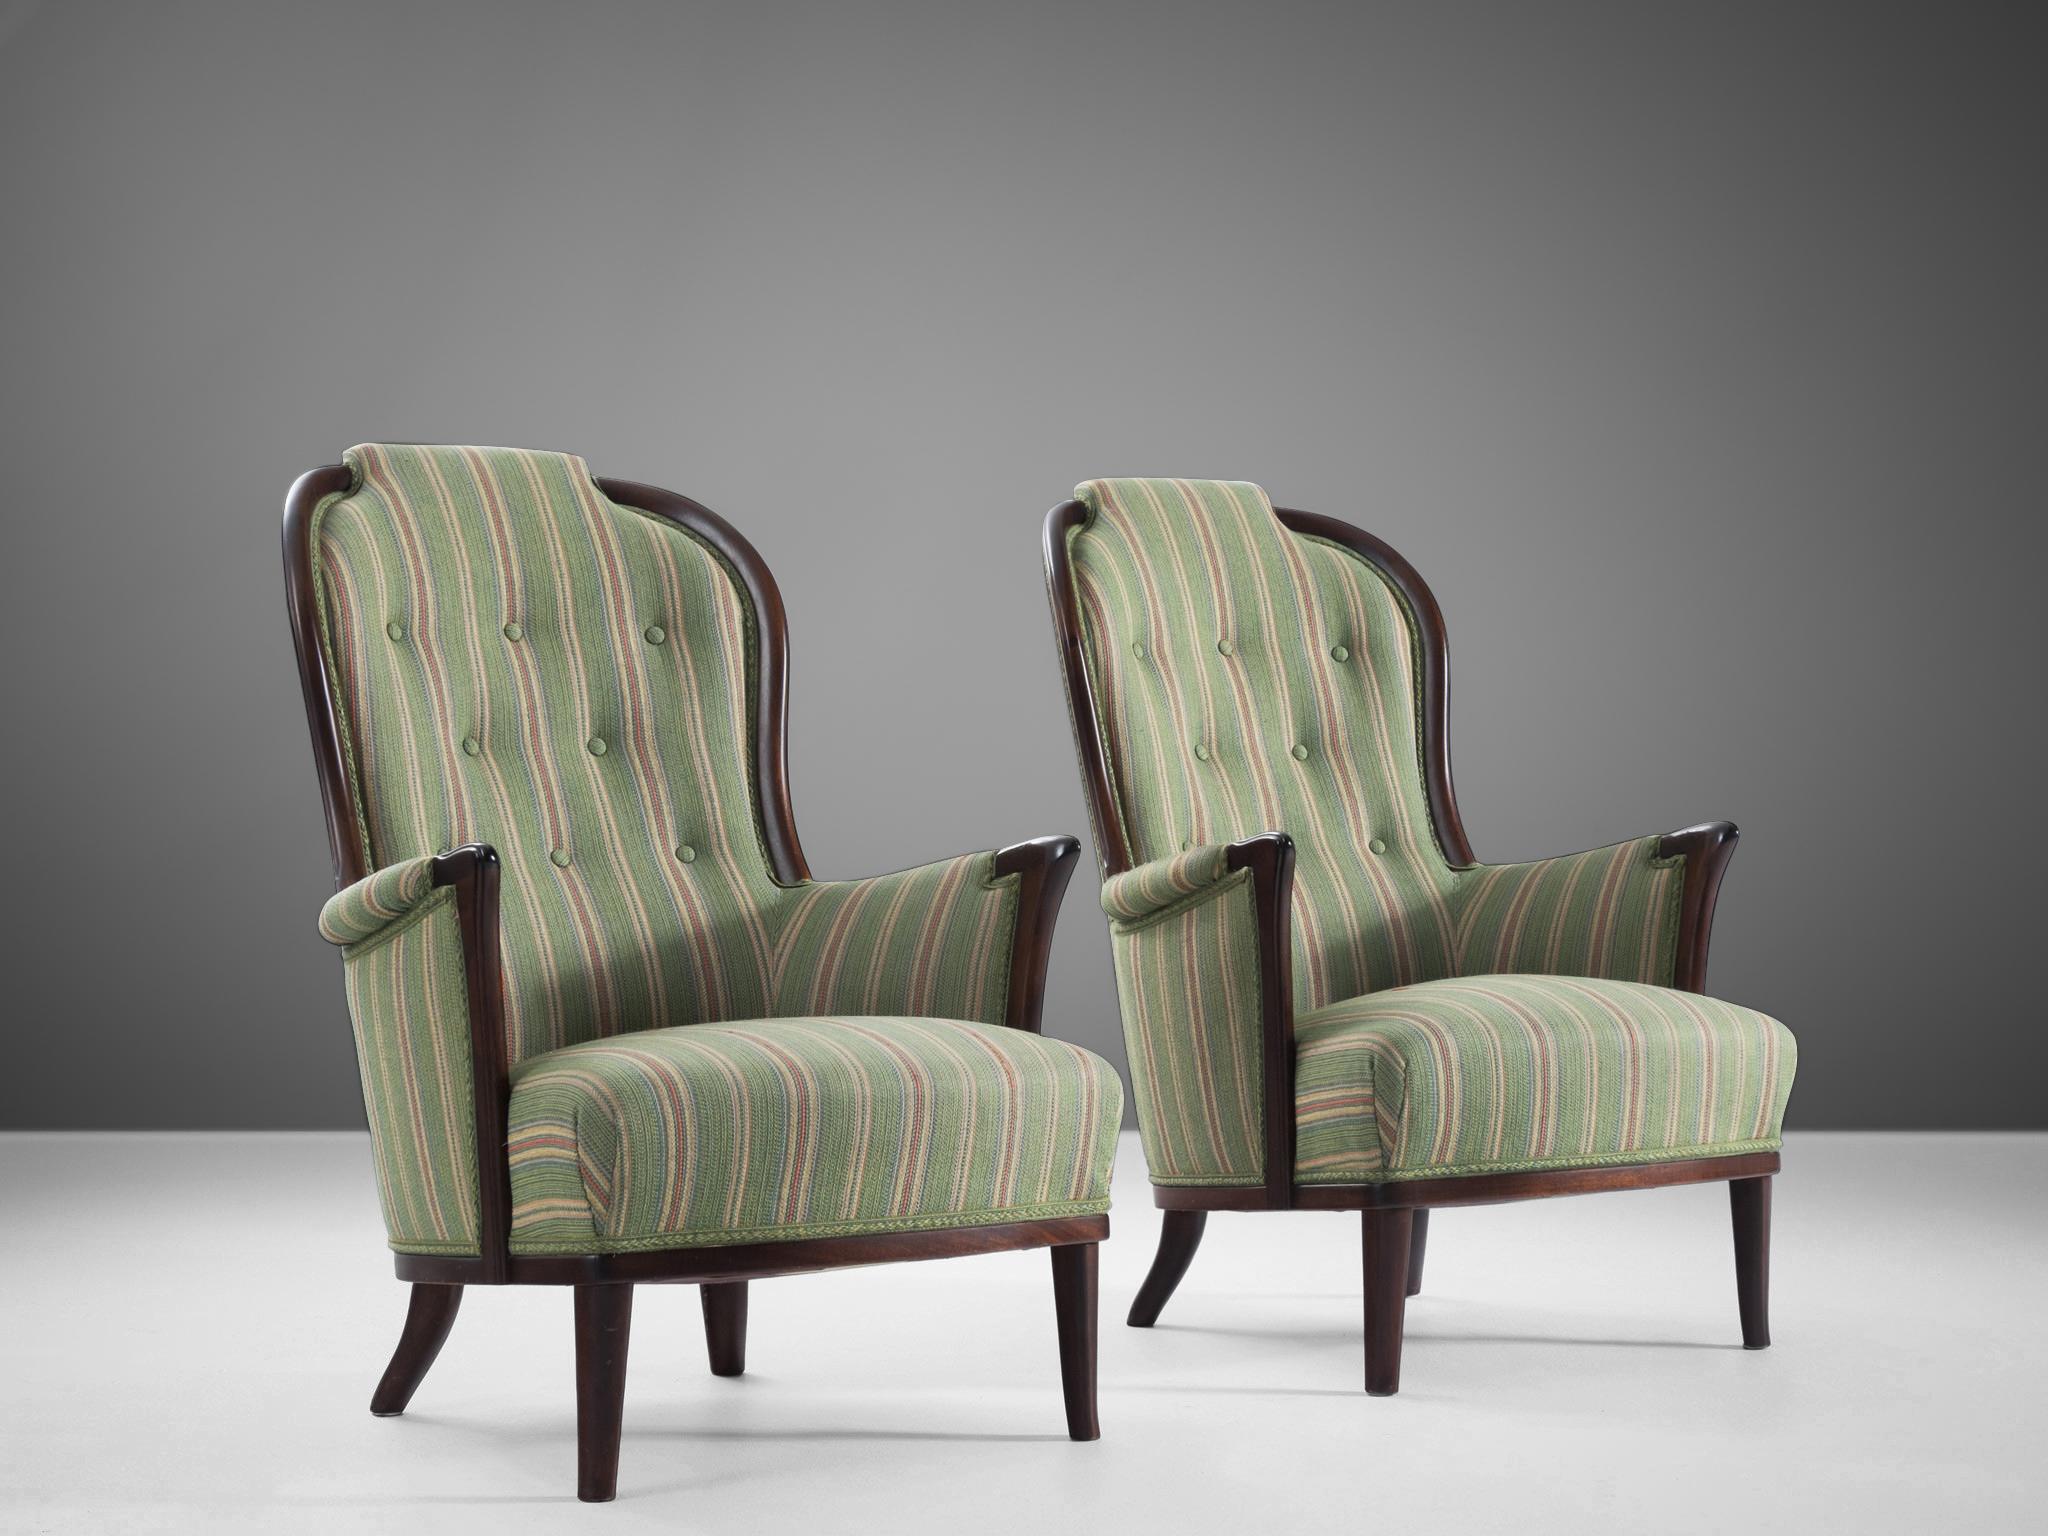 Carl Malmsten, pair of easy chairs, fabric, wood, Sweden, 1960s.

Pair of wonderful chairs that are very well designed by Carl Malmsten. The armchairs are upholstered in the original fabric mainly in the color green adorned with colorful stripes.